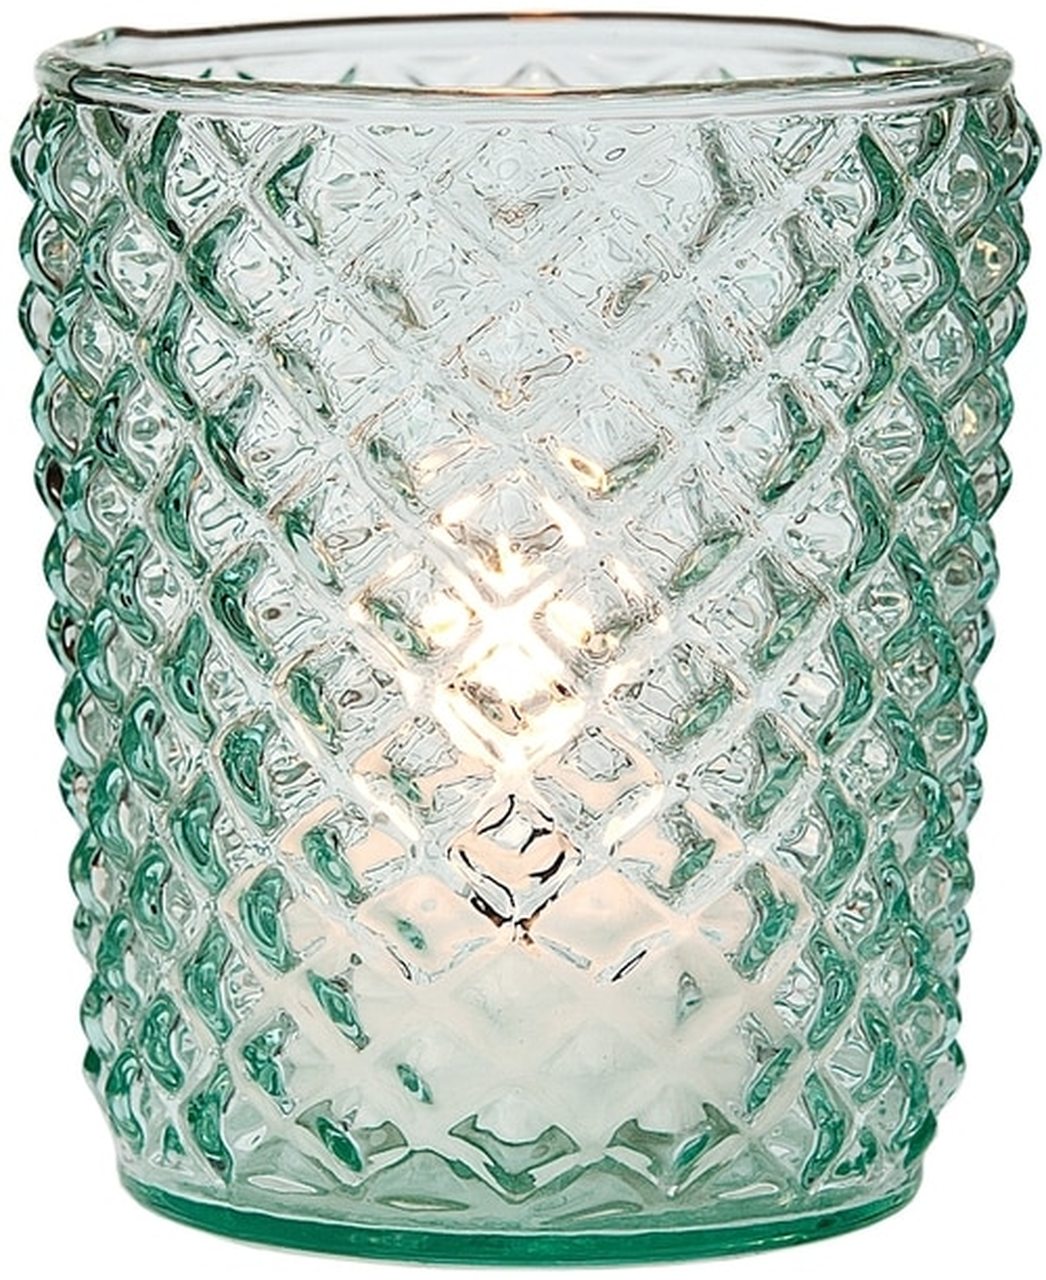 Vintage Glass Candle Holder (3-Inch, Zariah Design, Vintage Green) - For Use with Tea Lights - For Home Decor, Parties, and Wedding Decorations - PaperLanternStore.com - Paper Lanterns, Decor, Party Lights &amp; More